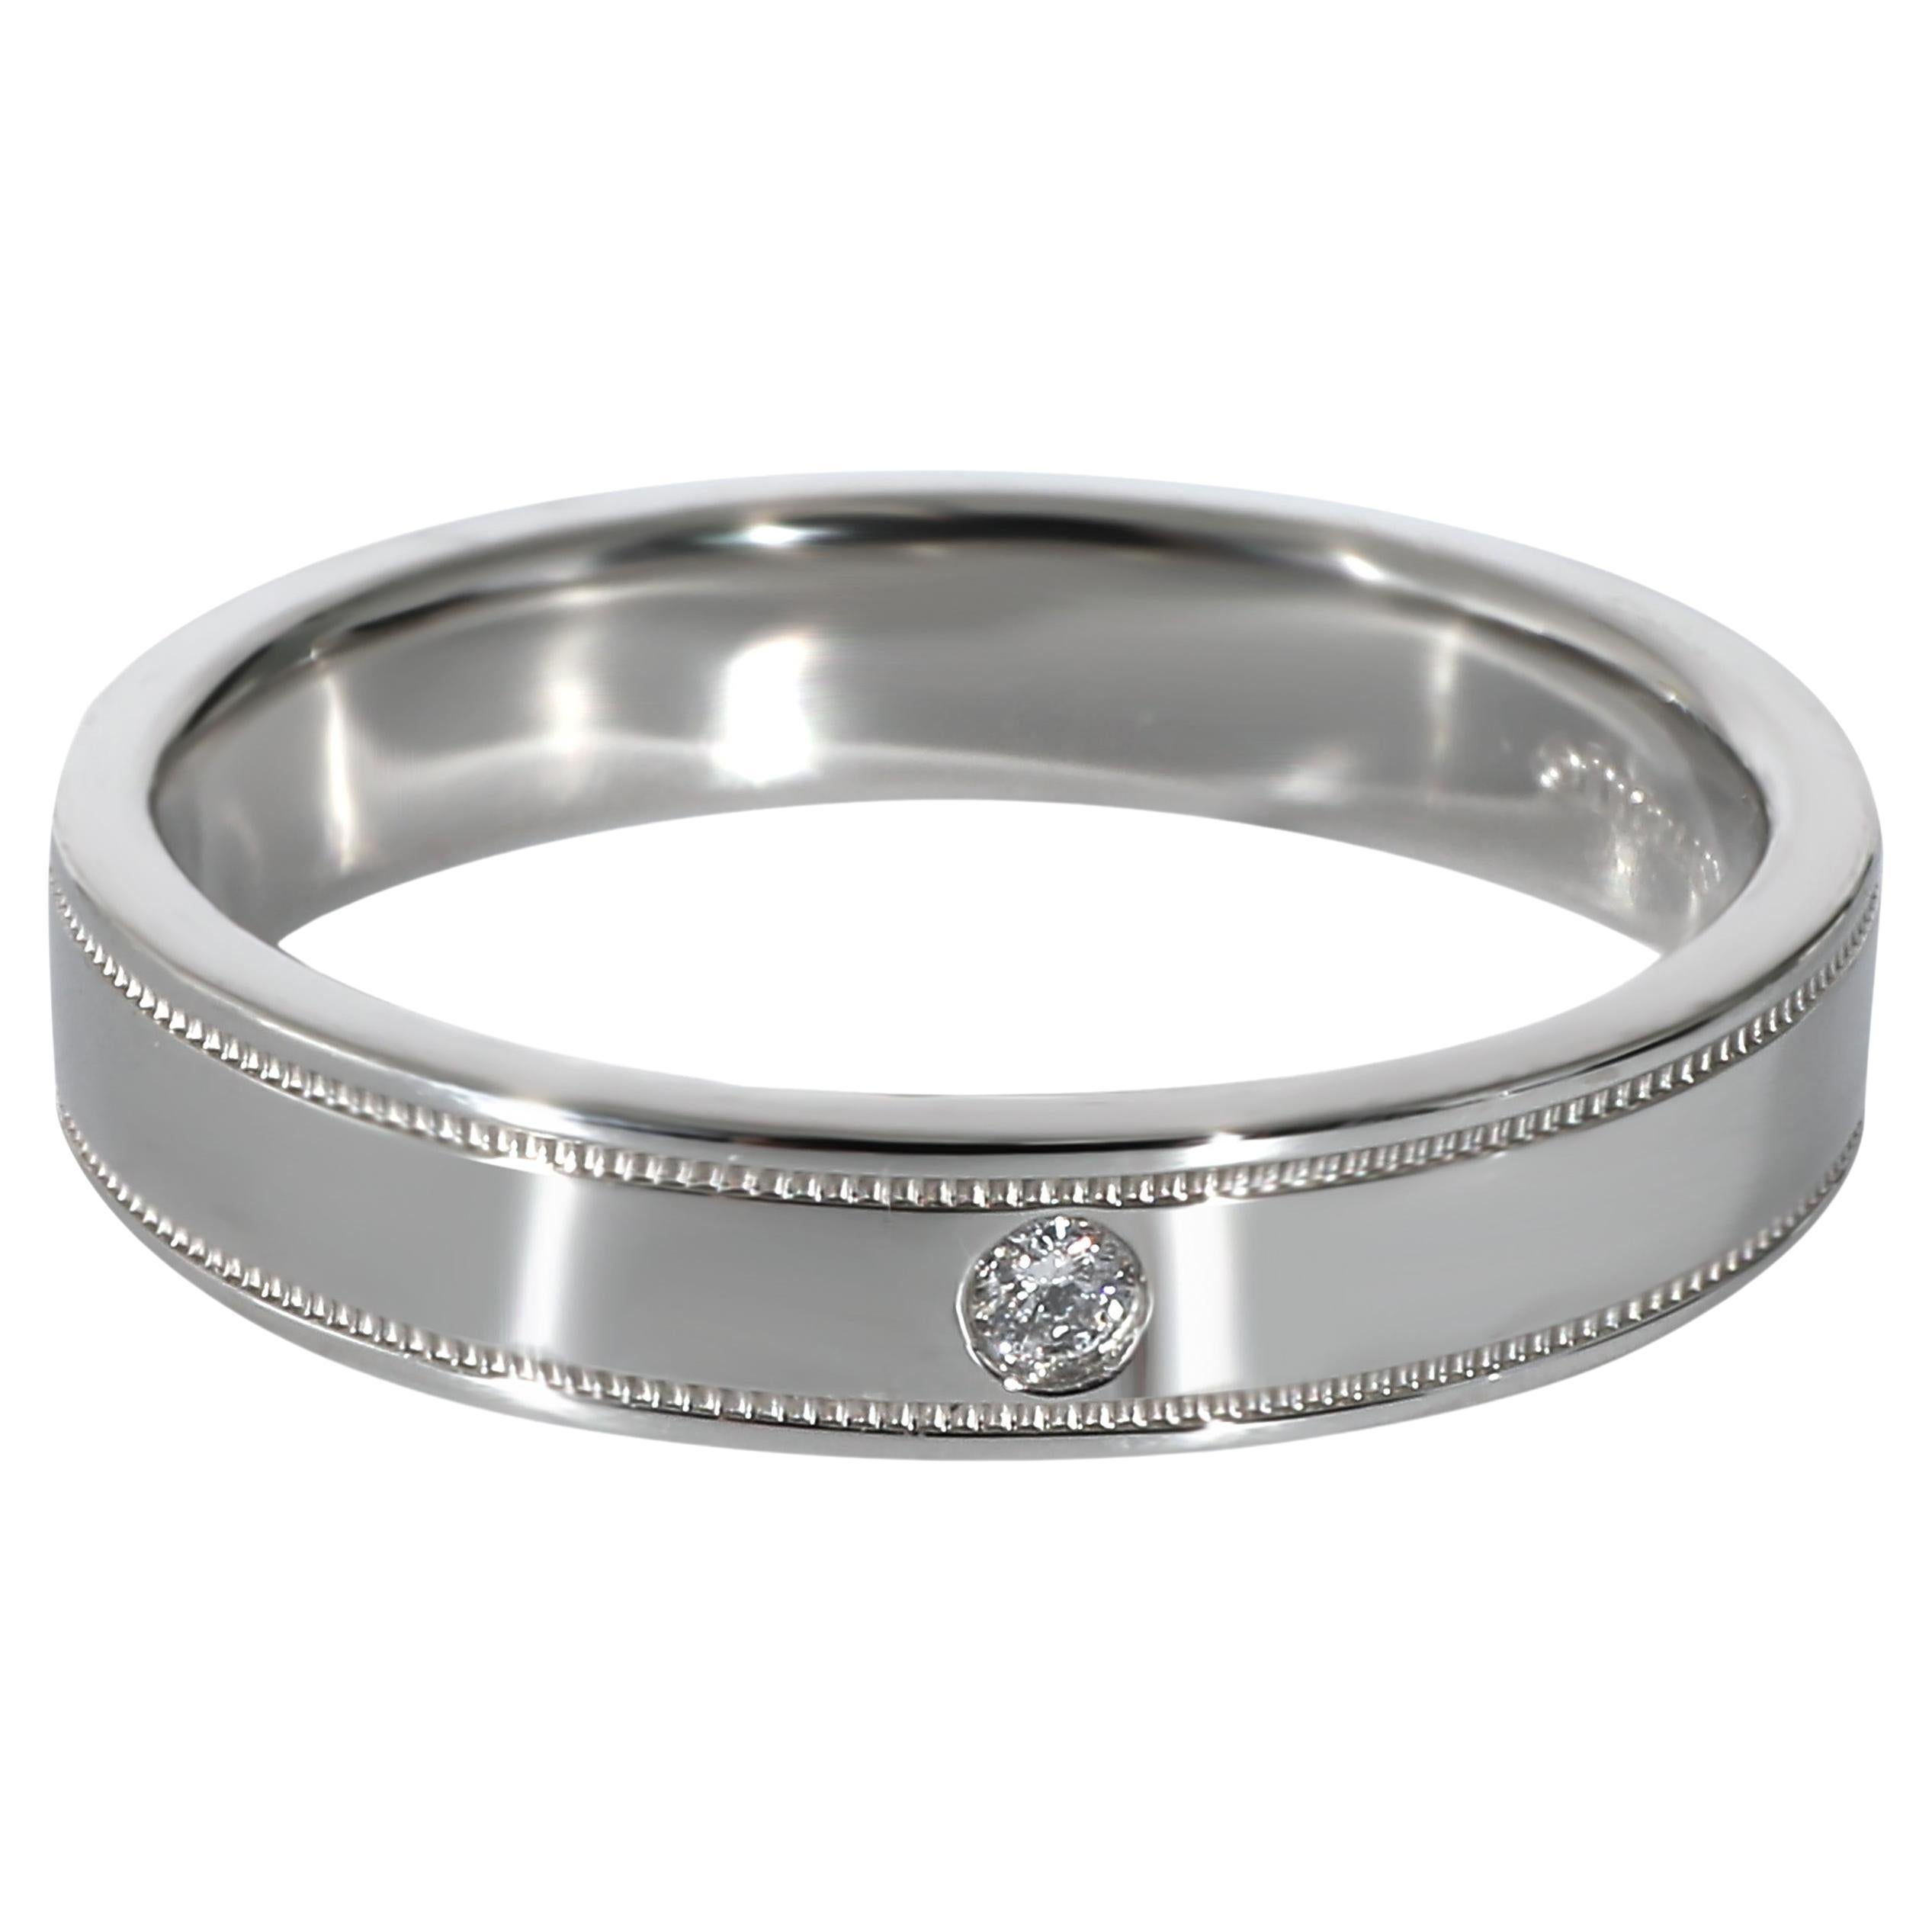 Tiffany & Co. Together Double Migrain Diamond Band in Platinum 0.01 CTW For Sale